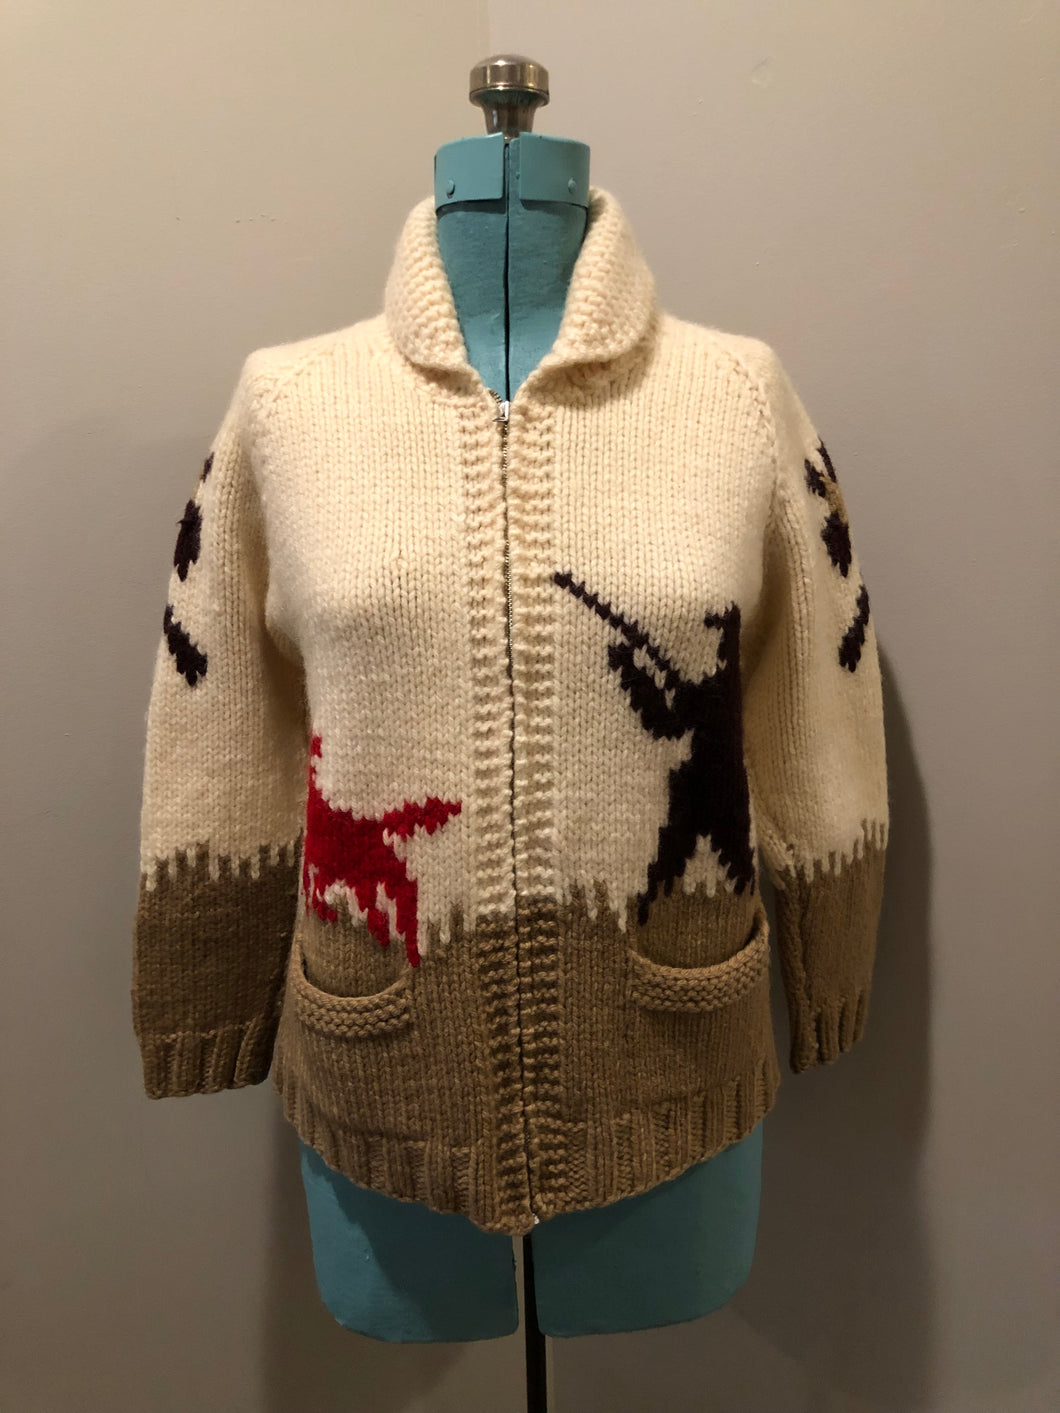 Kingspier Vintage - Vintage deadstock Mary Maxim 100$ wool cardigan. This cardigan features a pheasant hunting motif, two front pockets and a zipper closure.